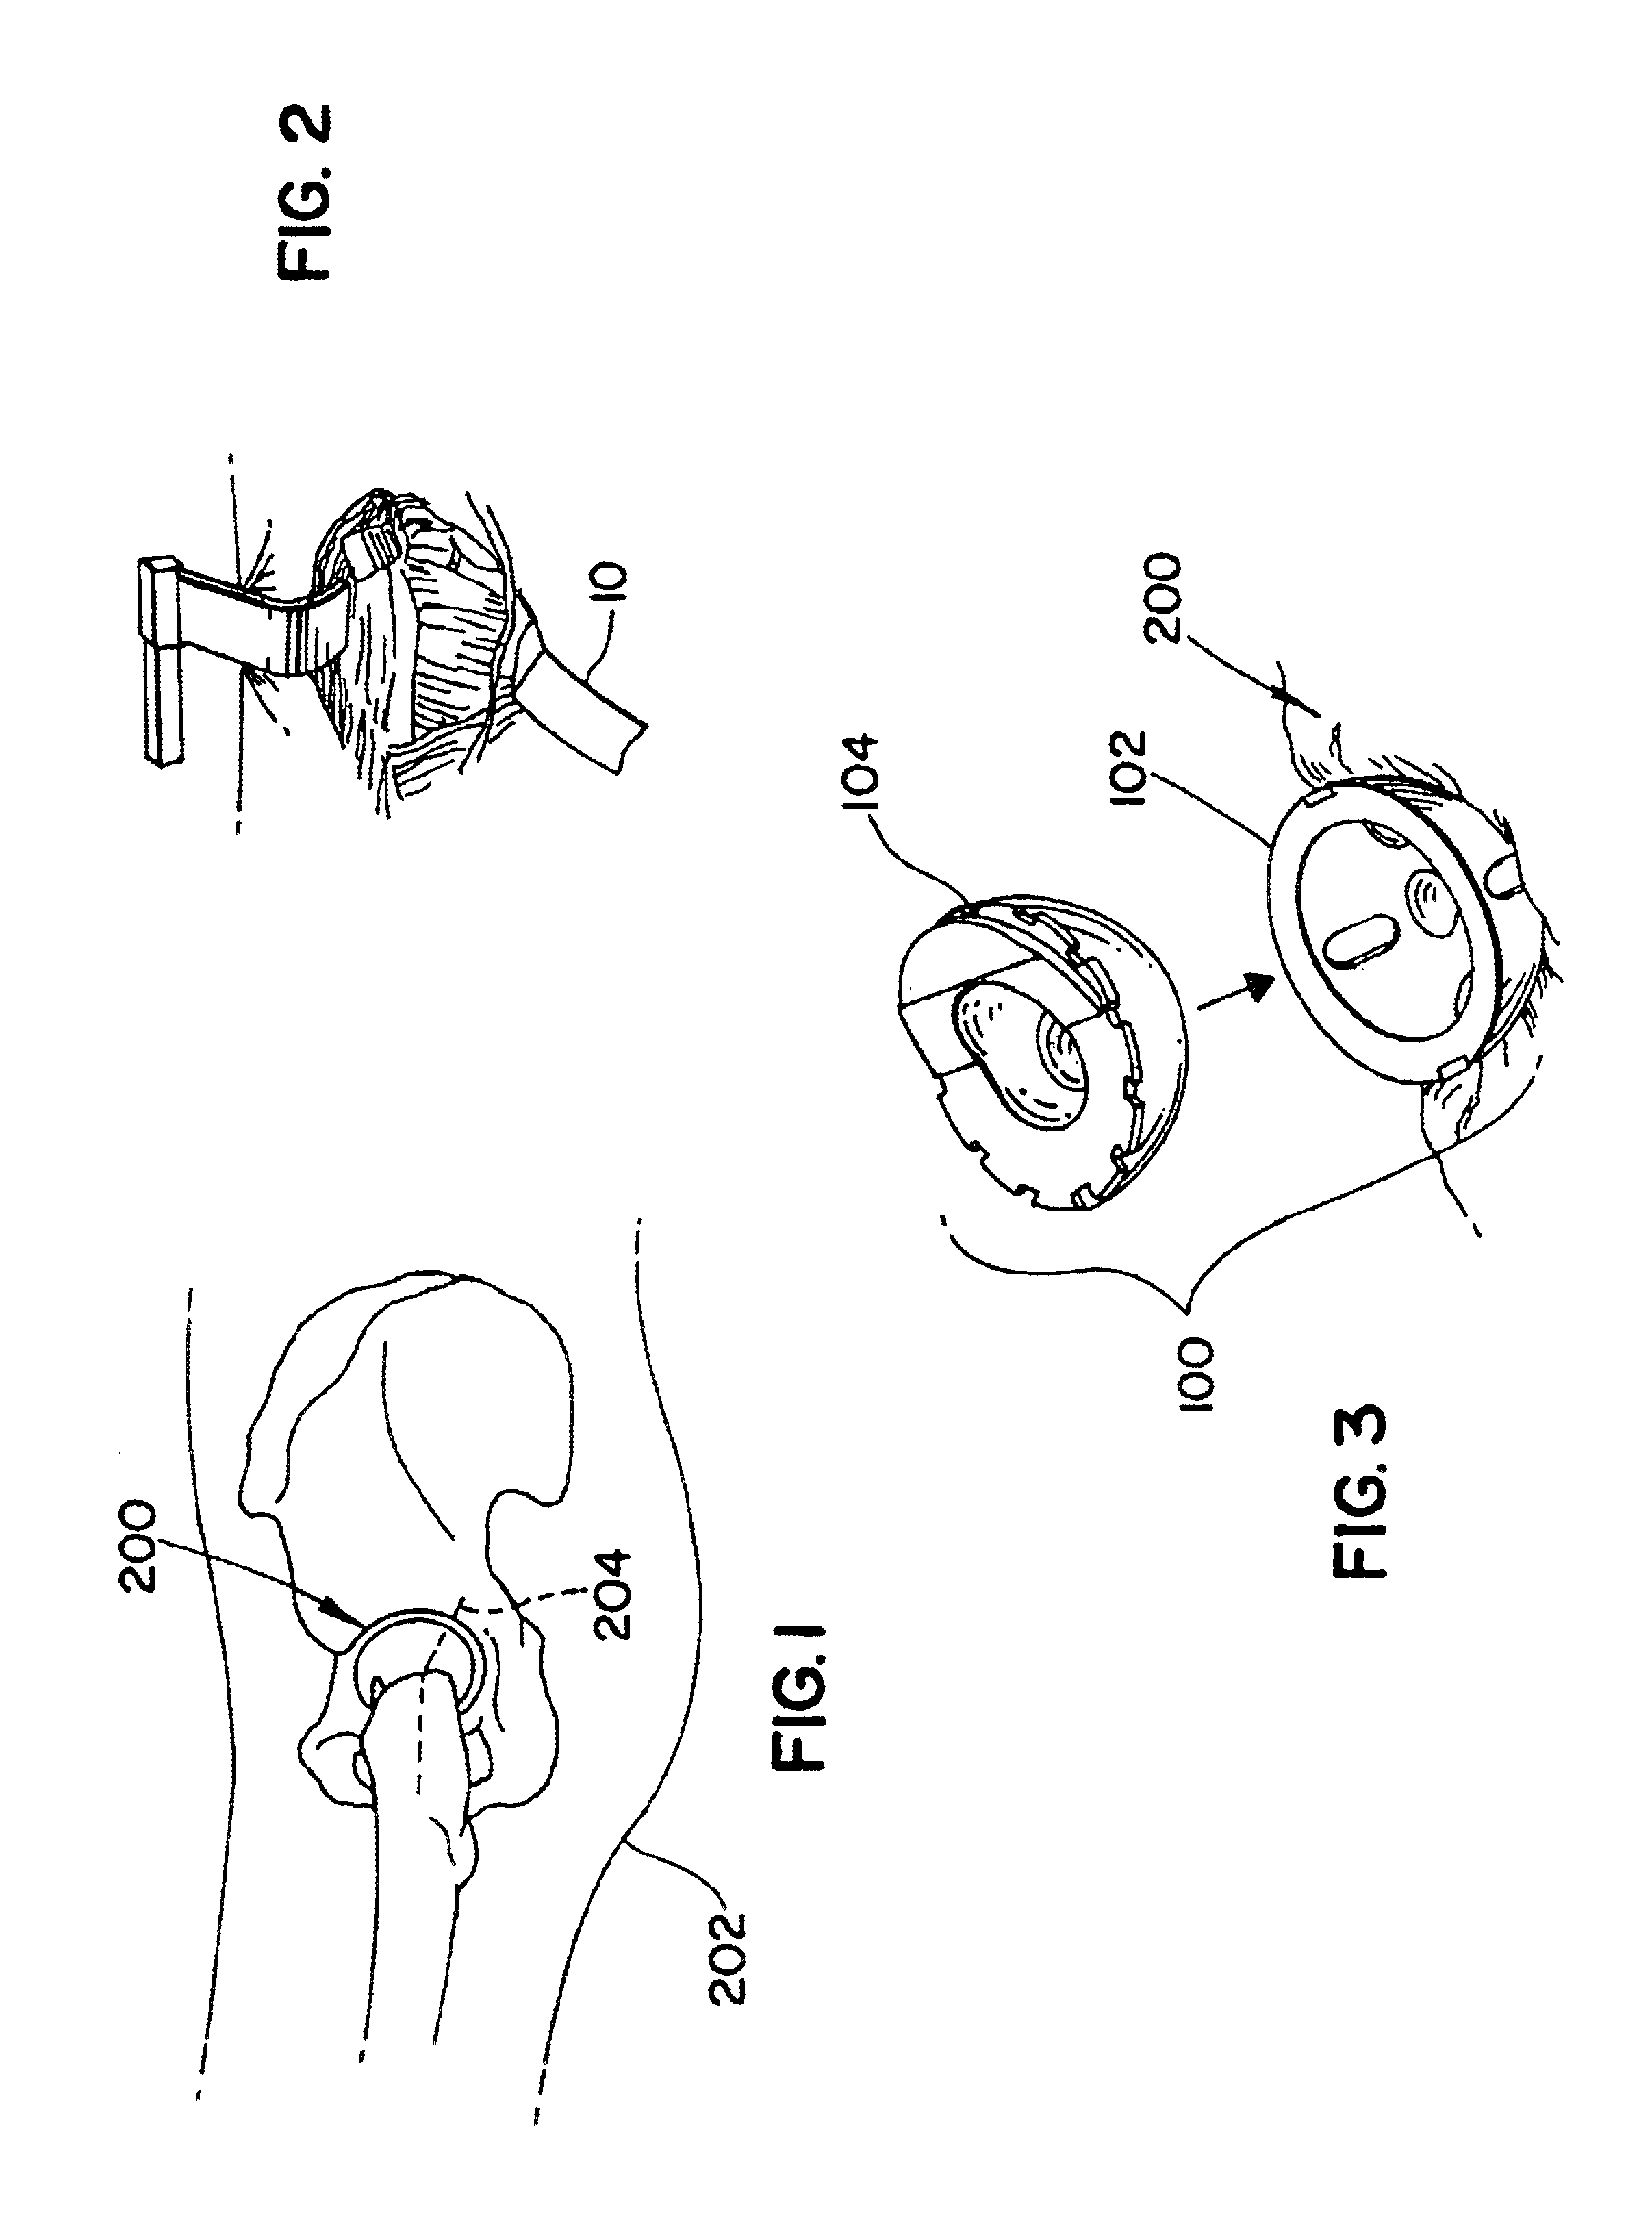 Posterior retractor and method of use for minimally invasive hip surgery